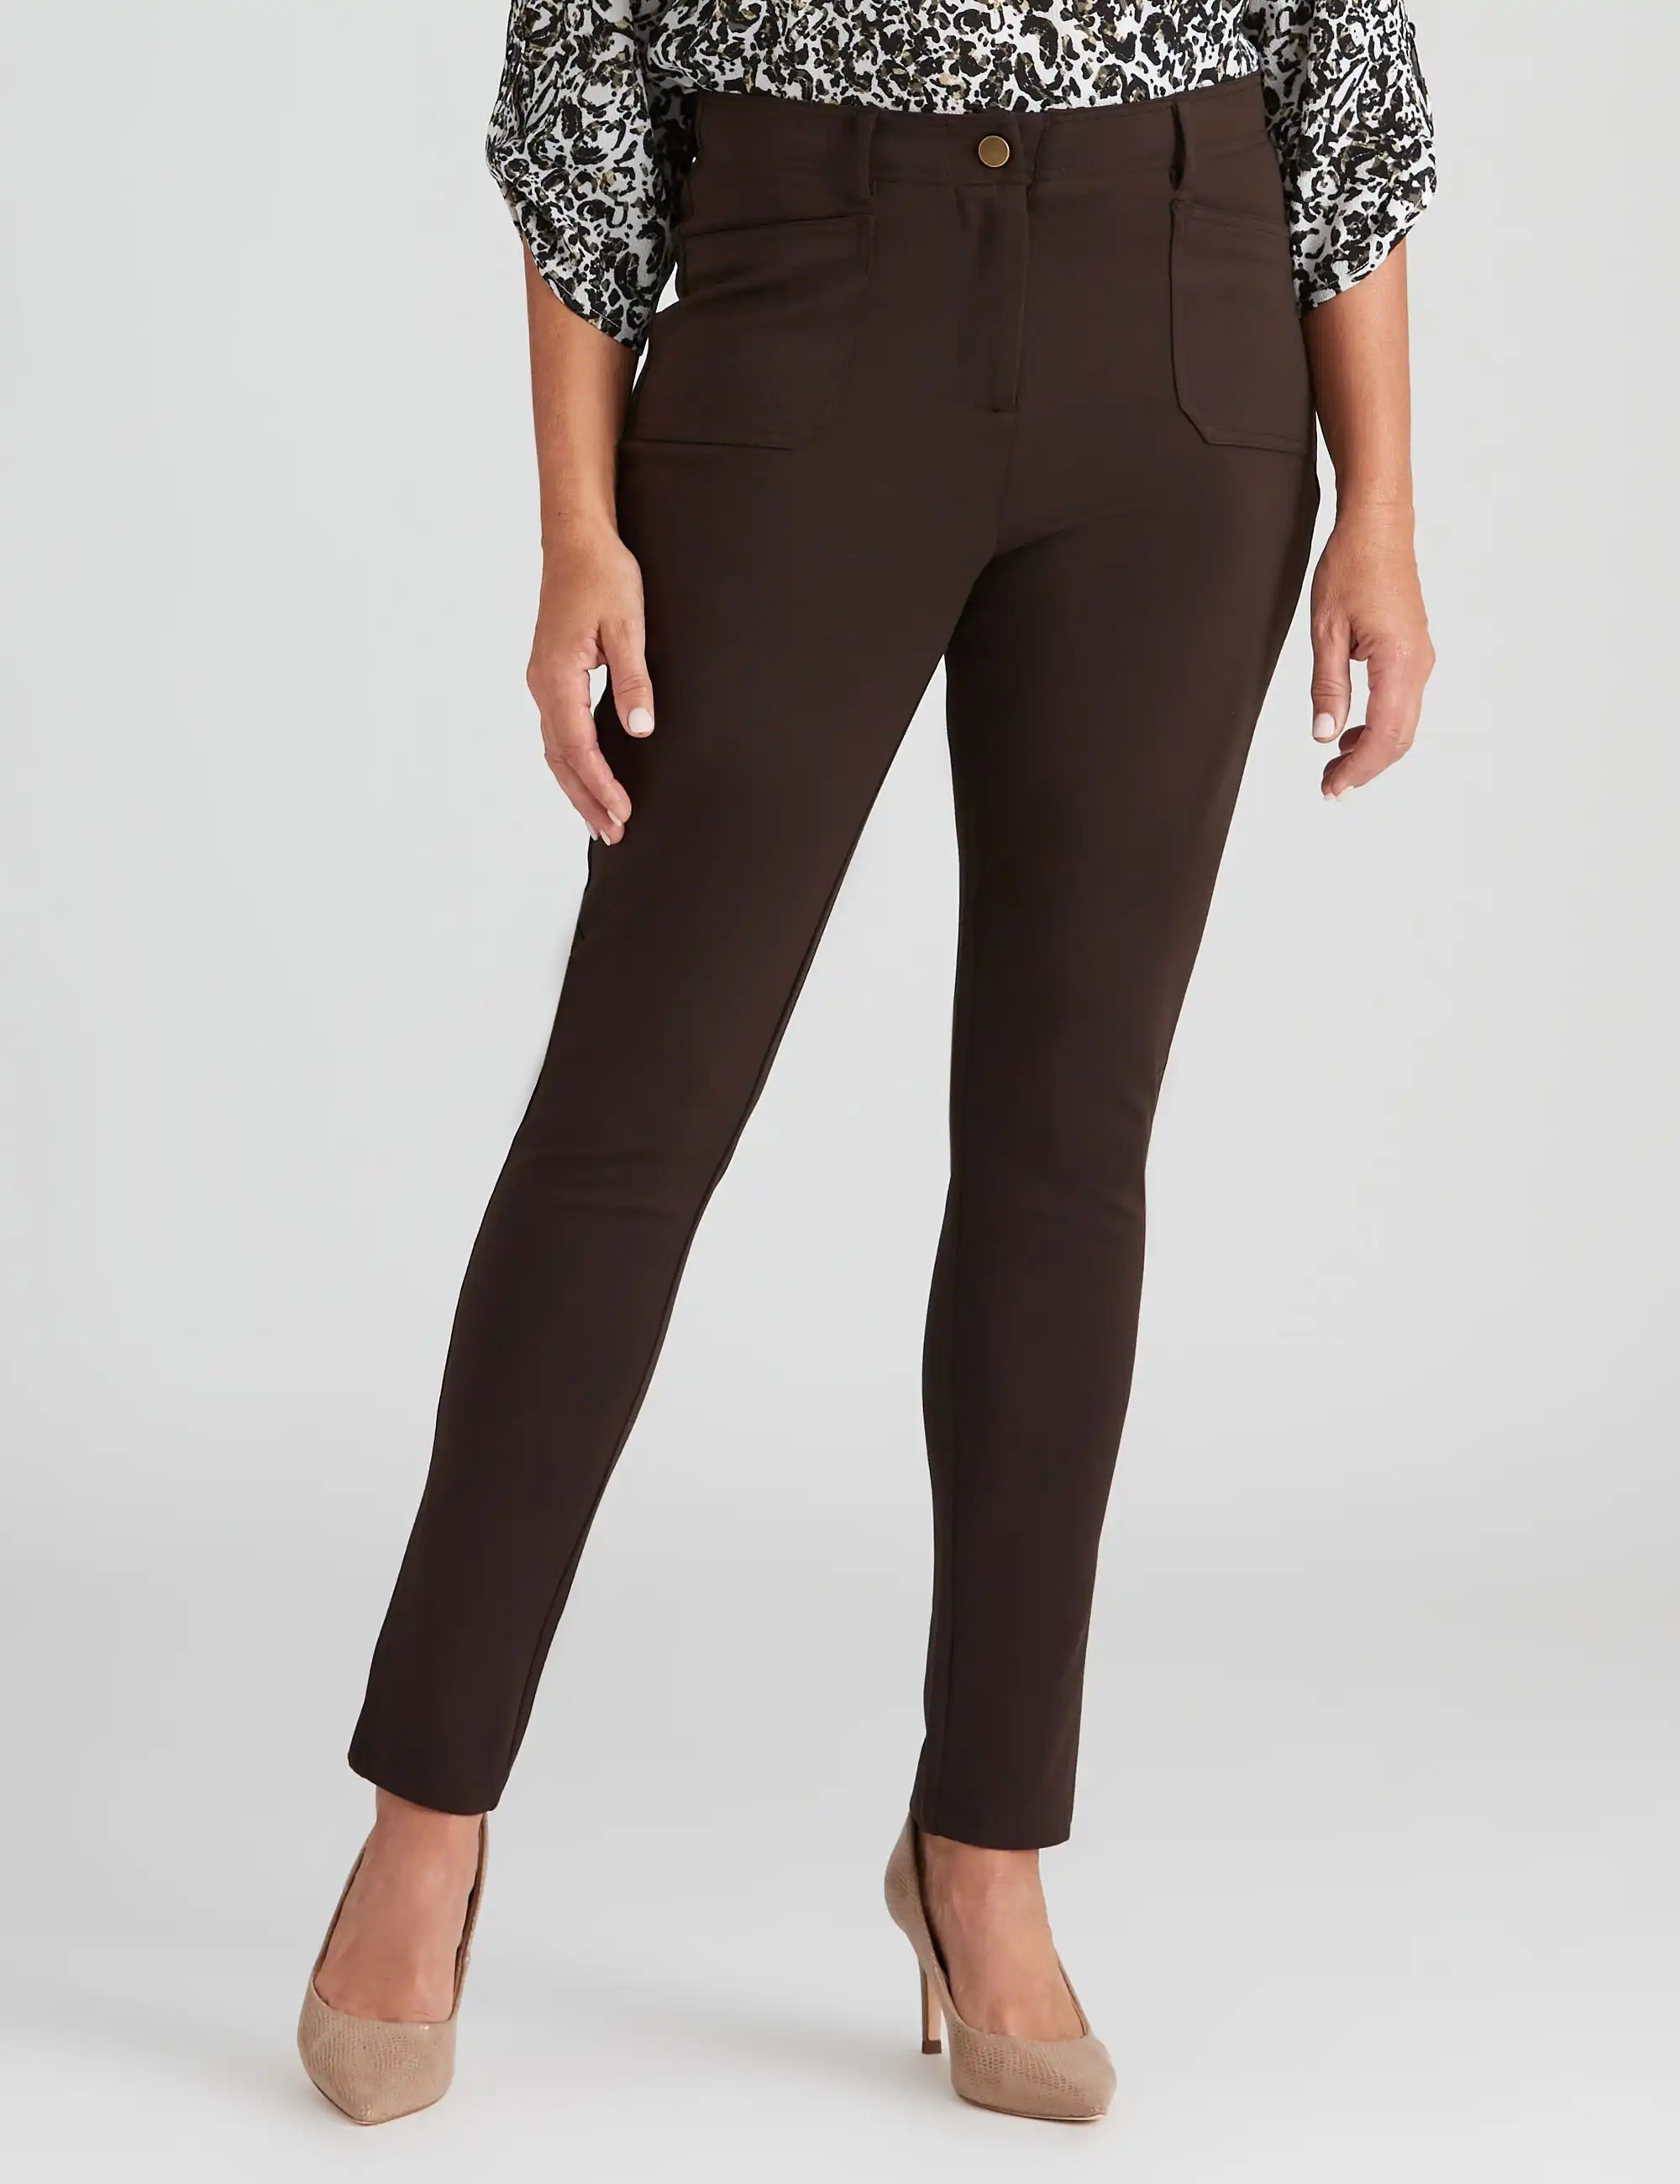 Millers Zipped Front Ponte Pants